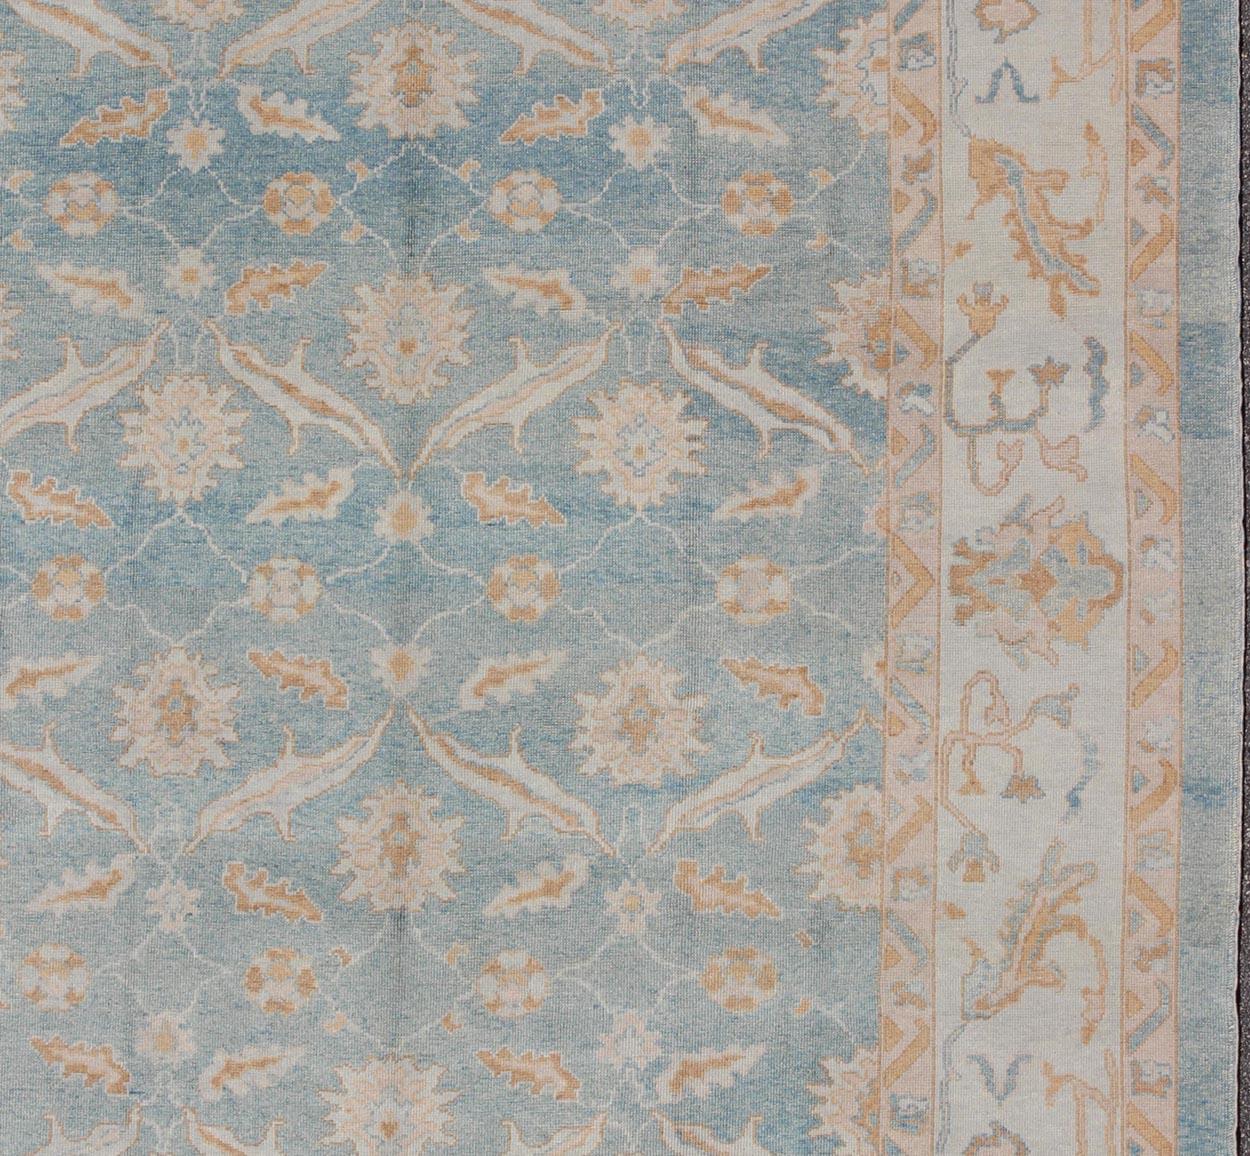 Blue, Taupe and Tan Turkish Oushak rug, rug MSD-3382, country of origin / type: Turkey / Angora Oushak.

Measures: 11'4'' x 13'1''. 

From our Oushak collection, this piece is made with a combination of hand spun wool and old wool. Featuring all